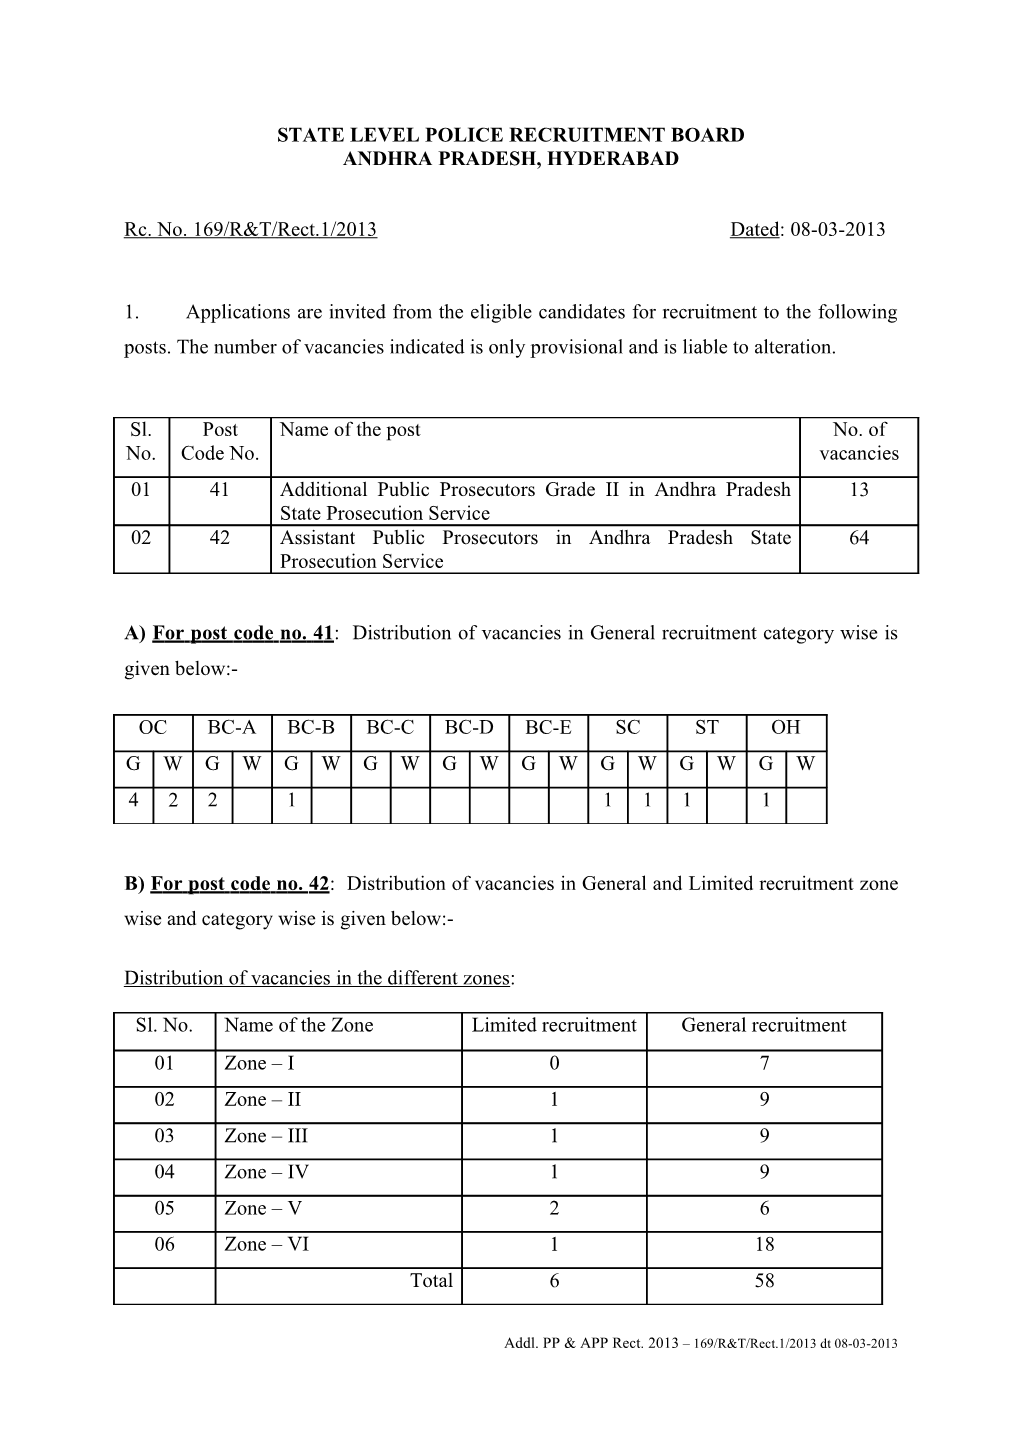 3. Addl. PP - APP Notification 2013 Dated 08-03-2013